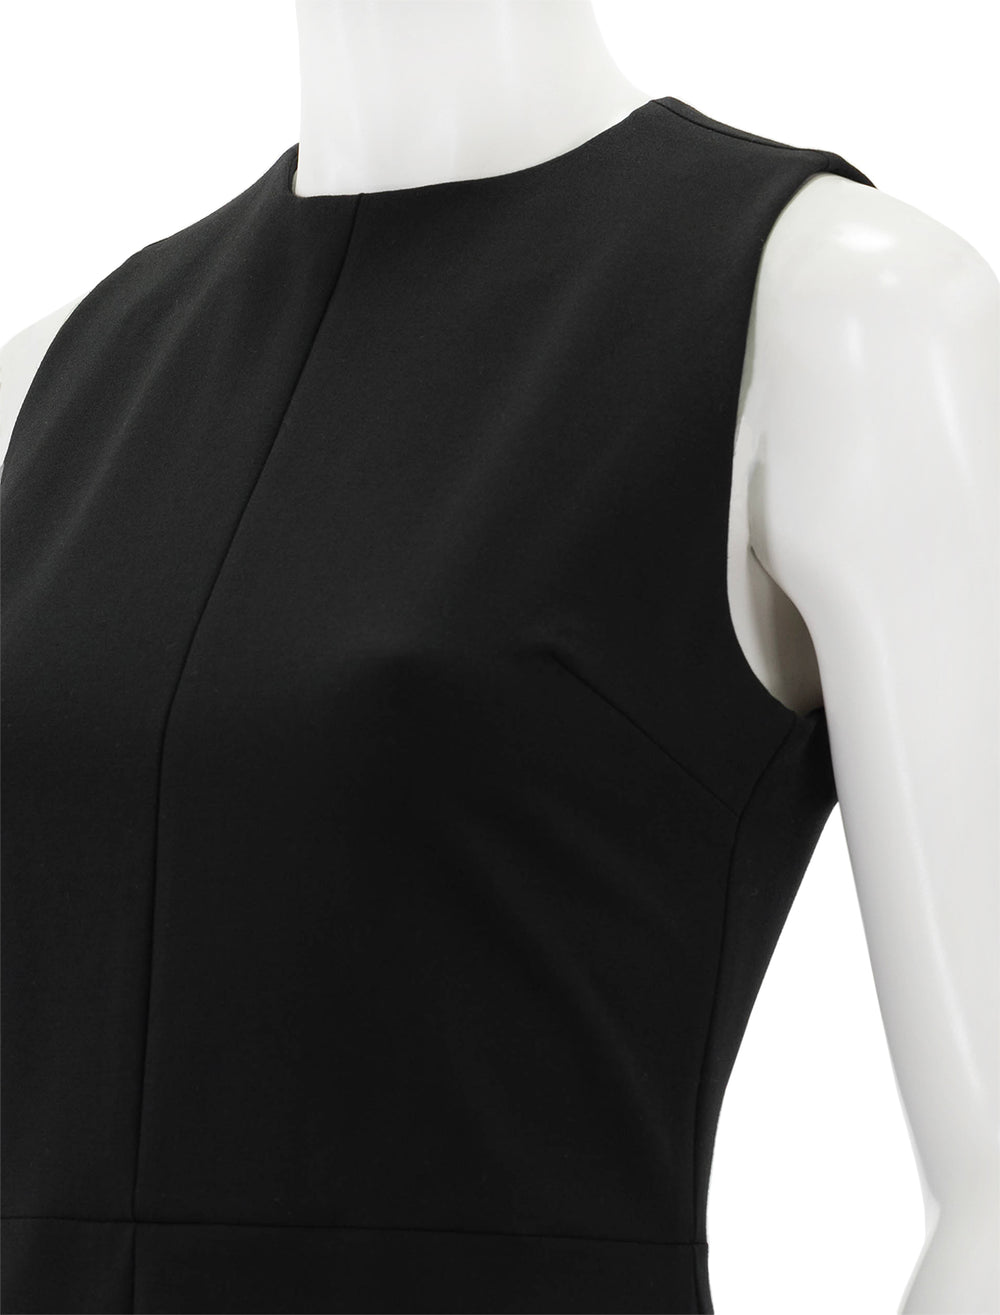 Close-up view of Vince's seamed front sheath dress in black.